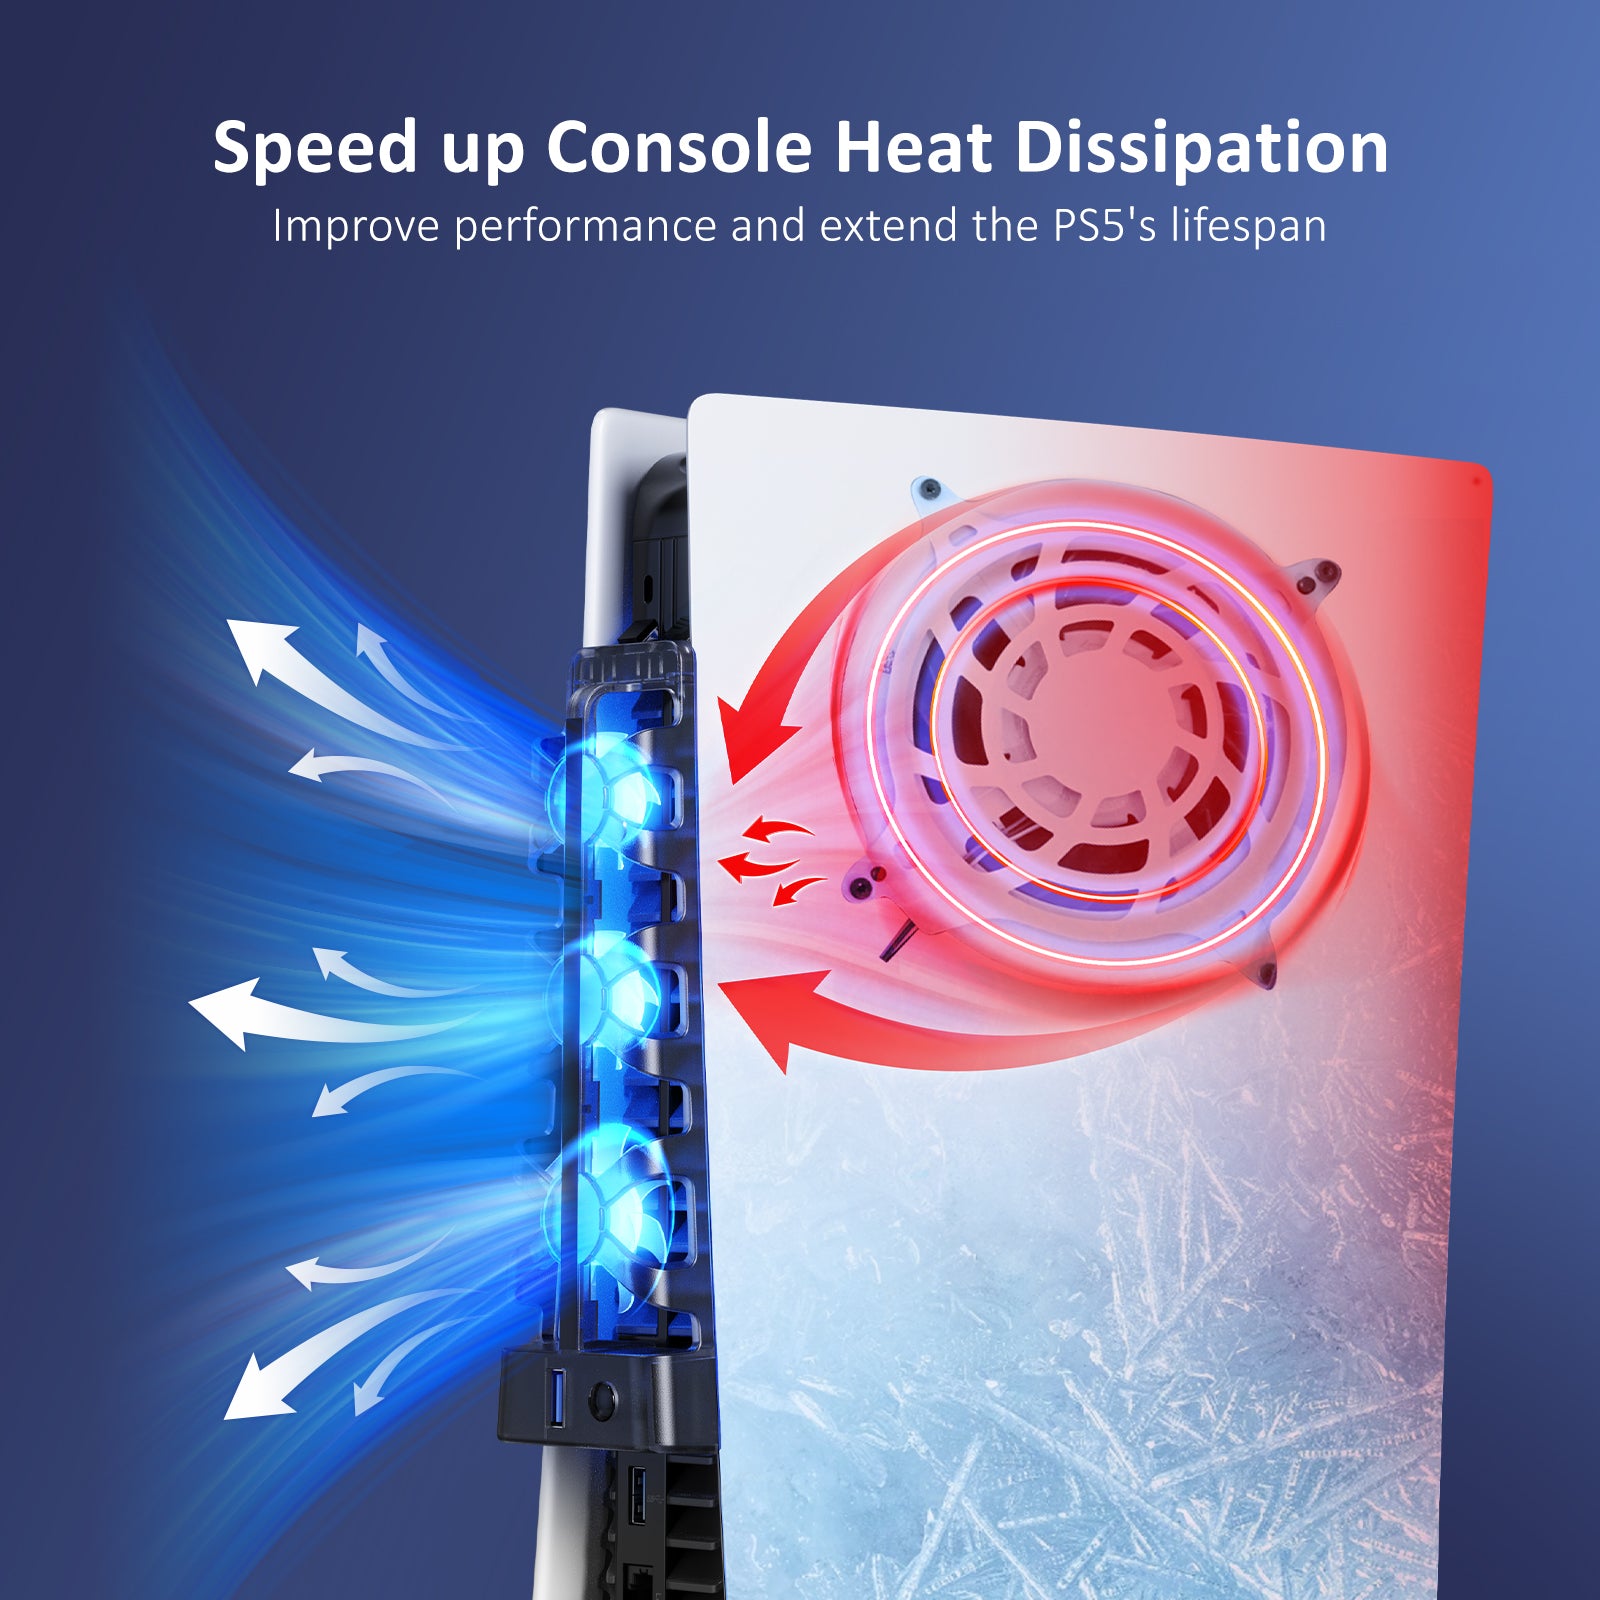 This Cooling Fan can accelerate the heat dissipation of the console.